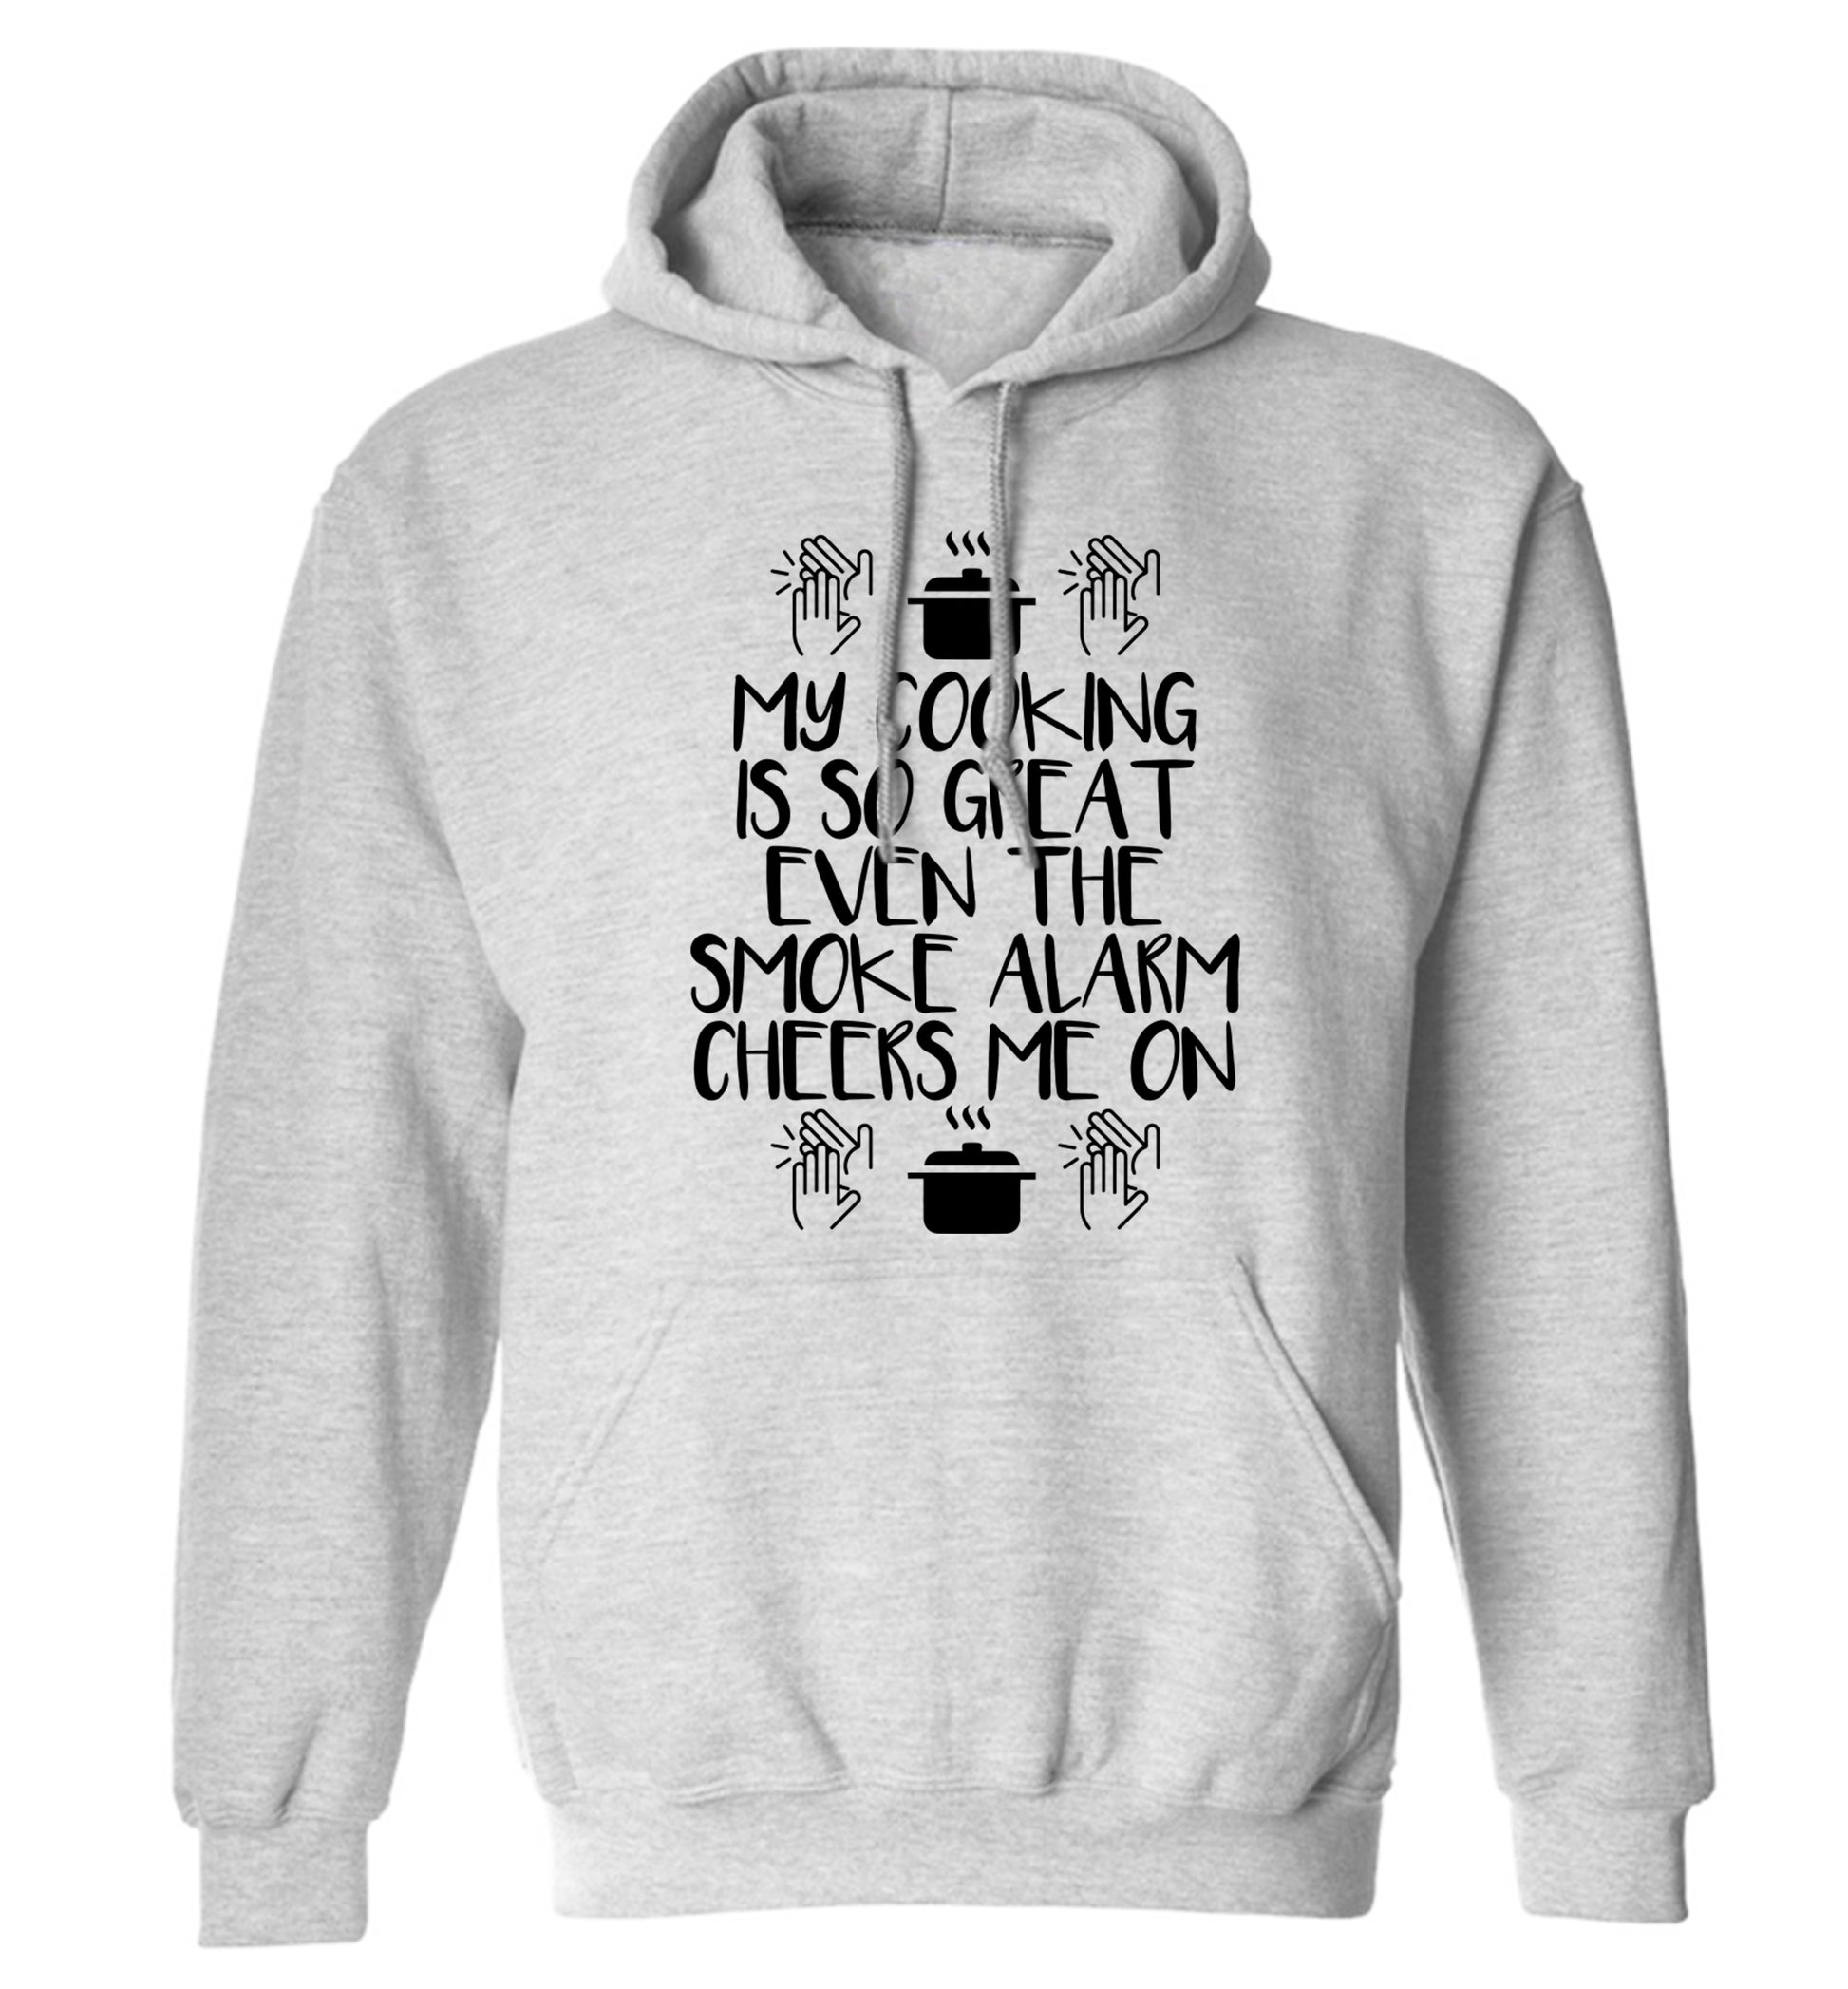 My cooking is so great even the smoke alarm cheers me on! adults unisex grey hoodie 2XL